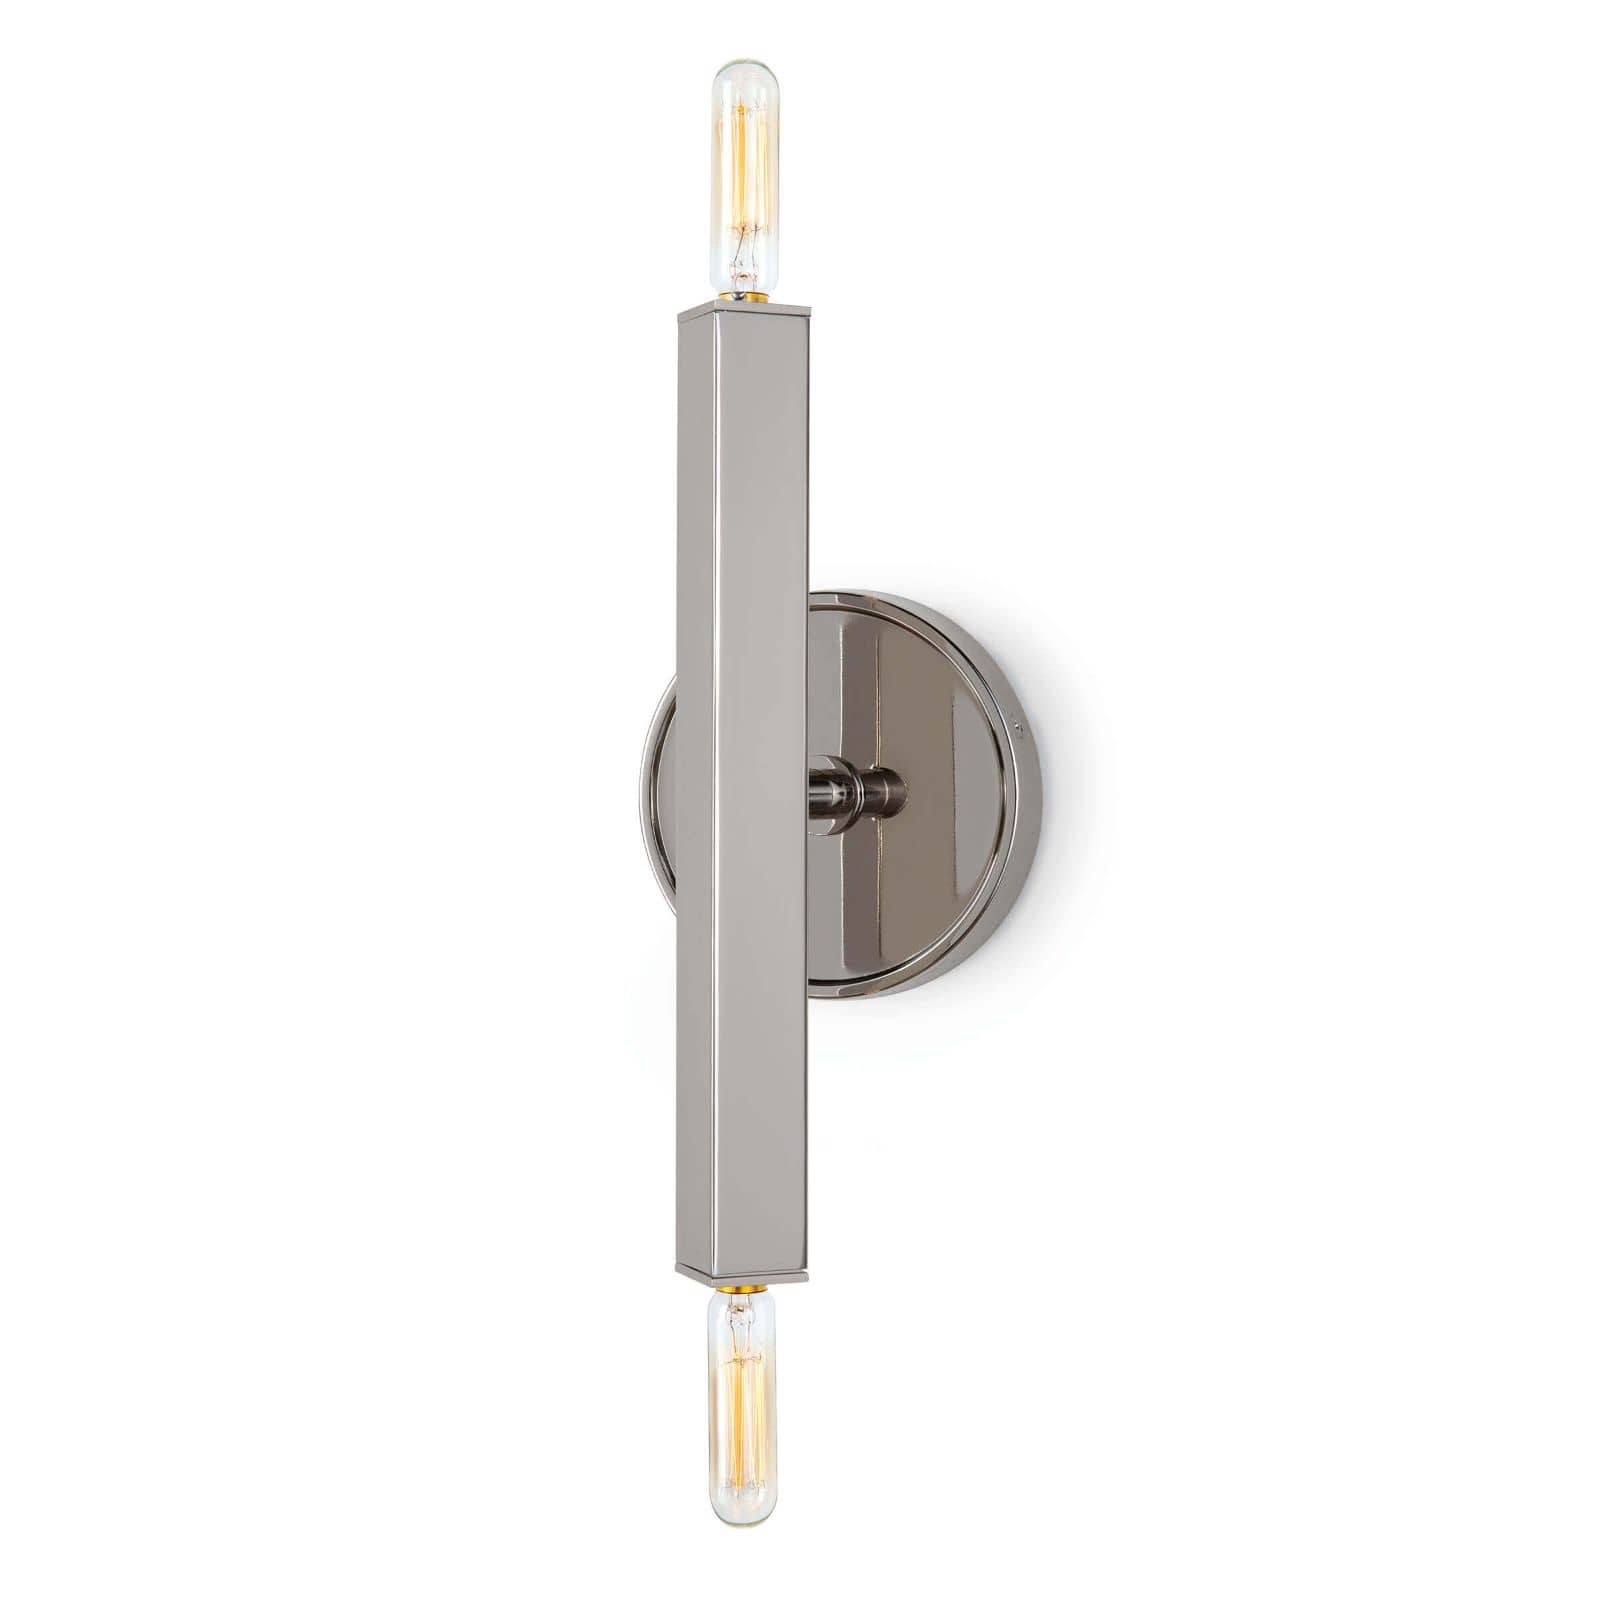 Viper Sconce in Polished Nickel by Regina Andrew